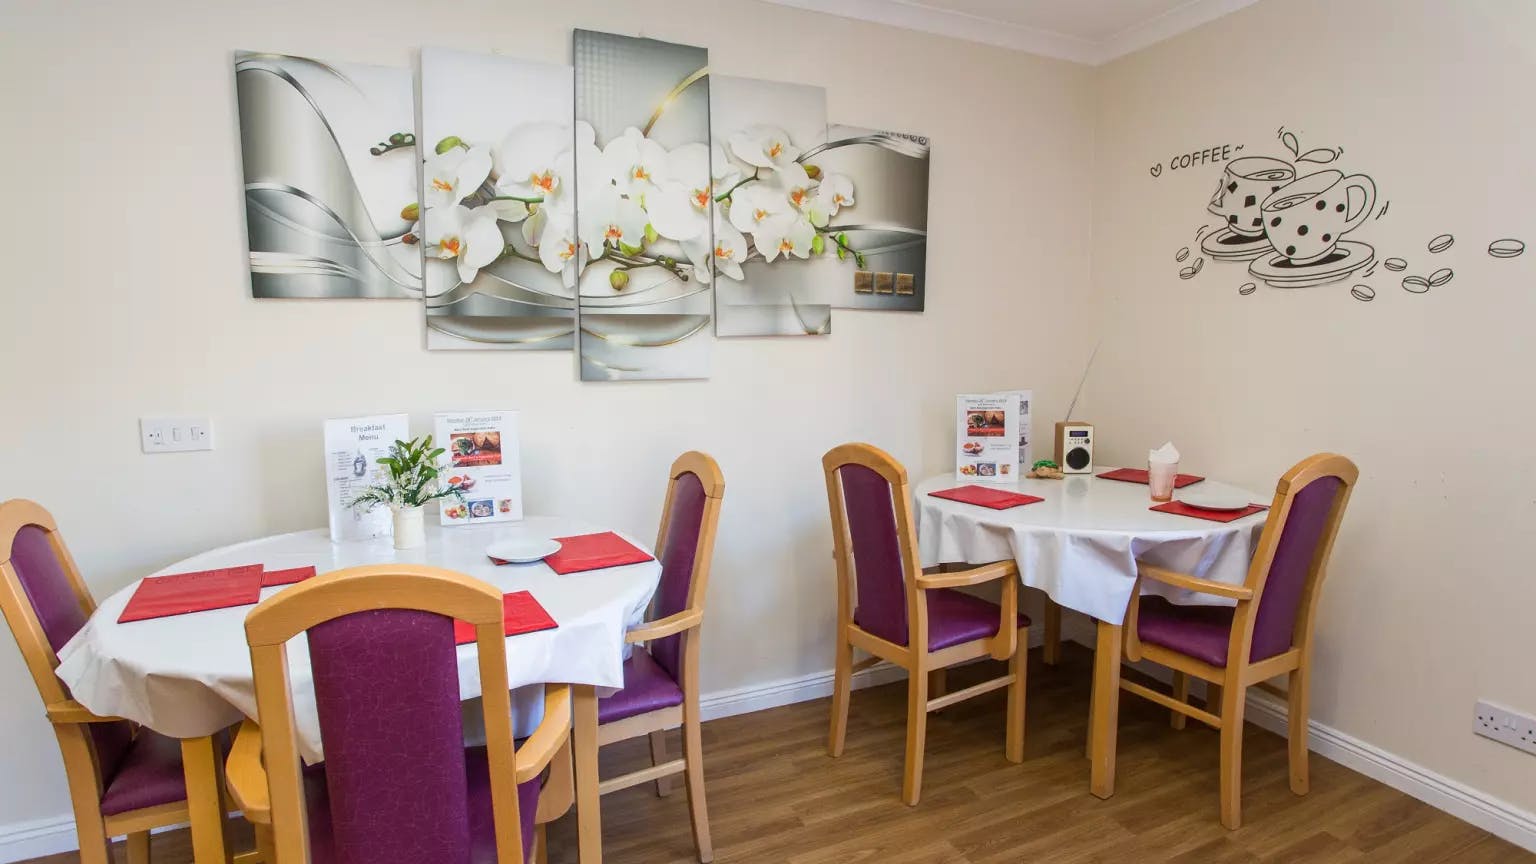 Dining area of Courtland Lodge care home in Watford, Hertfordshire